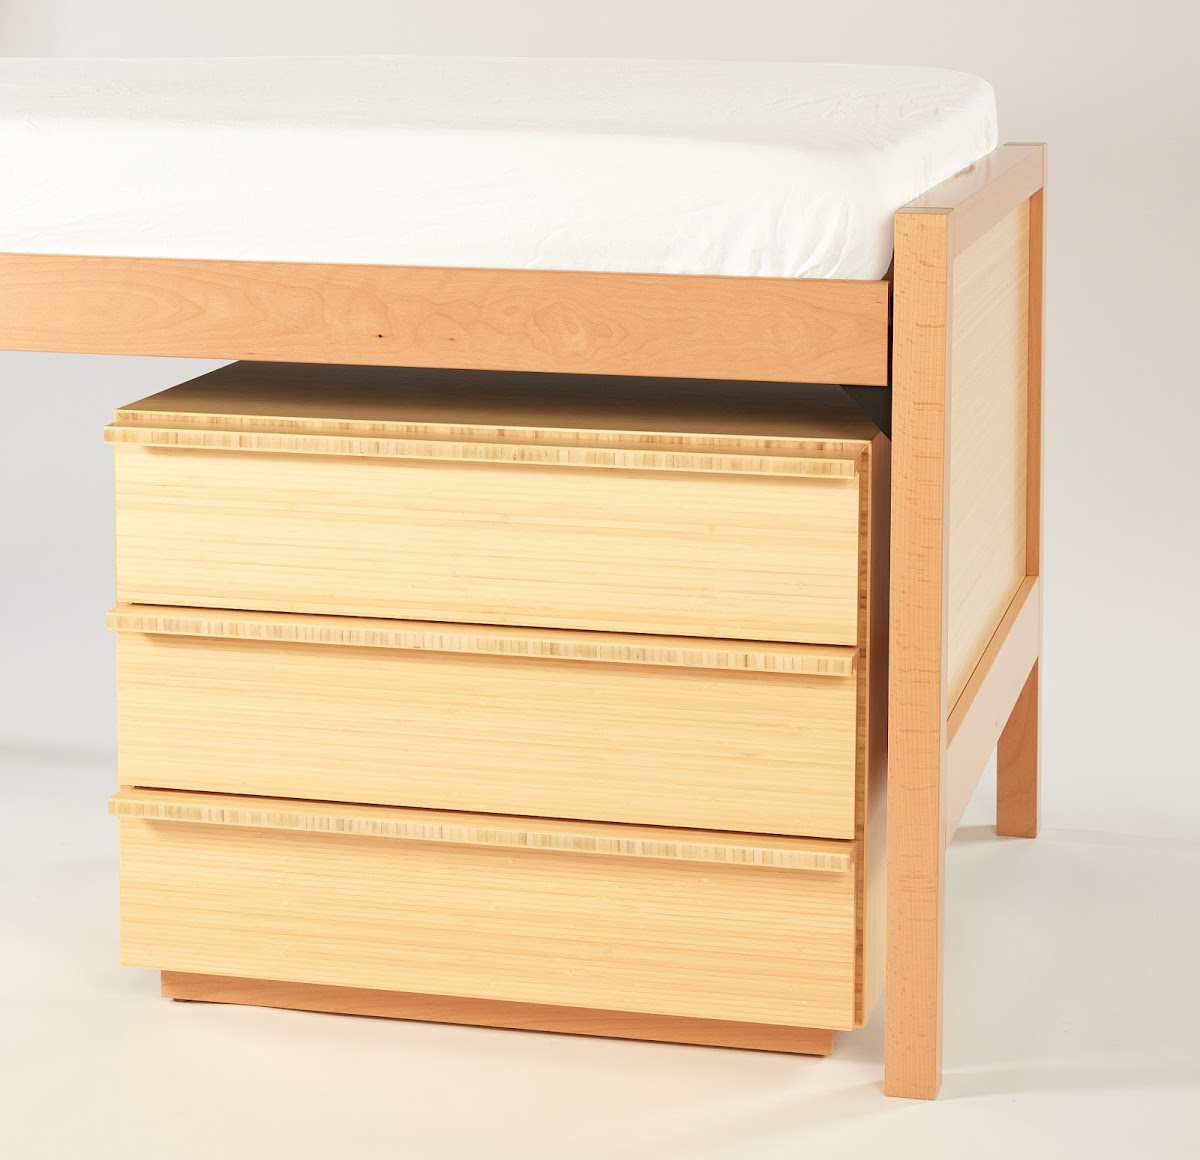 Wooden drawers under bed for new North Hall RISD residence, by Professors John Dunnigan MFA 80 ID and Lothar Windels BID 96